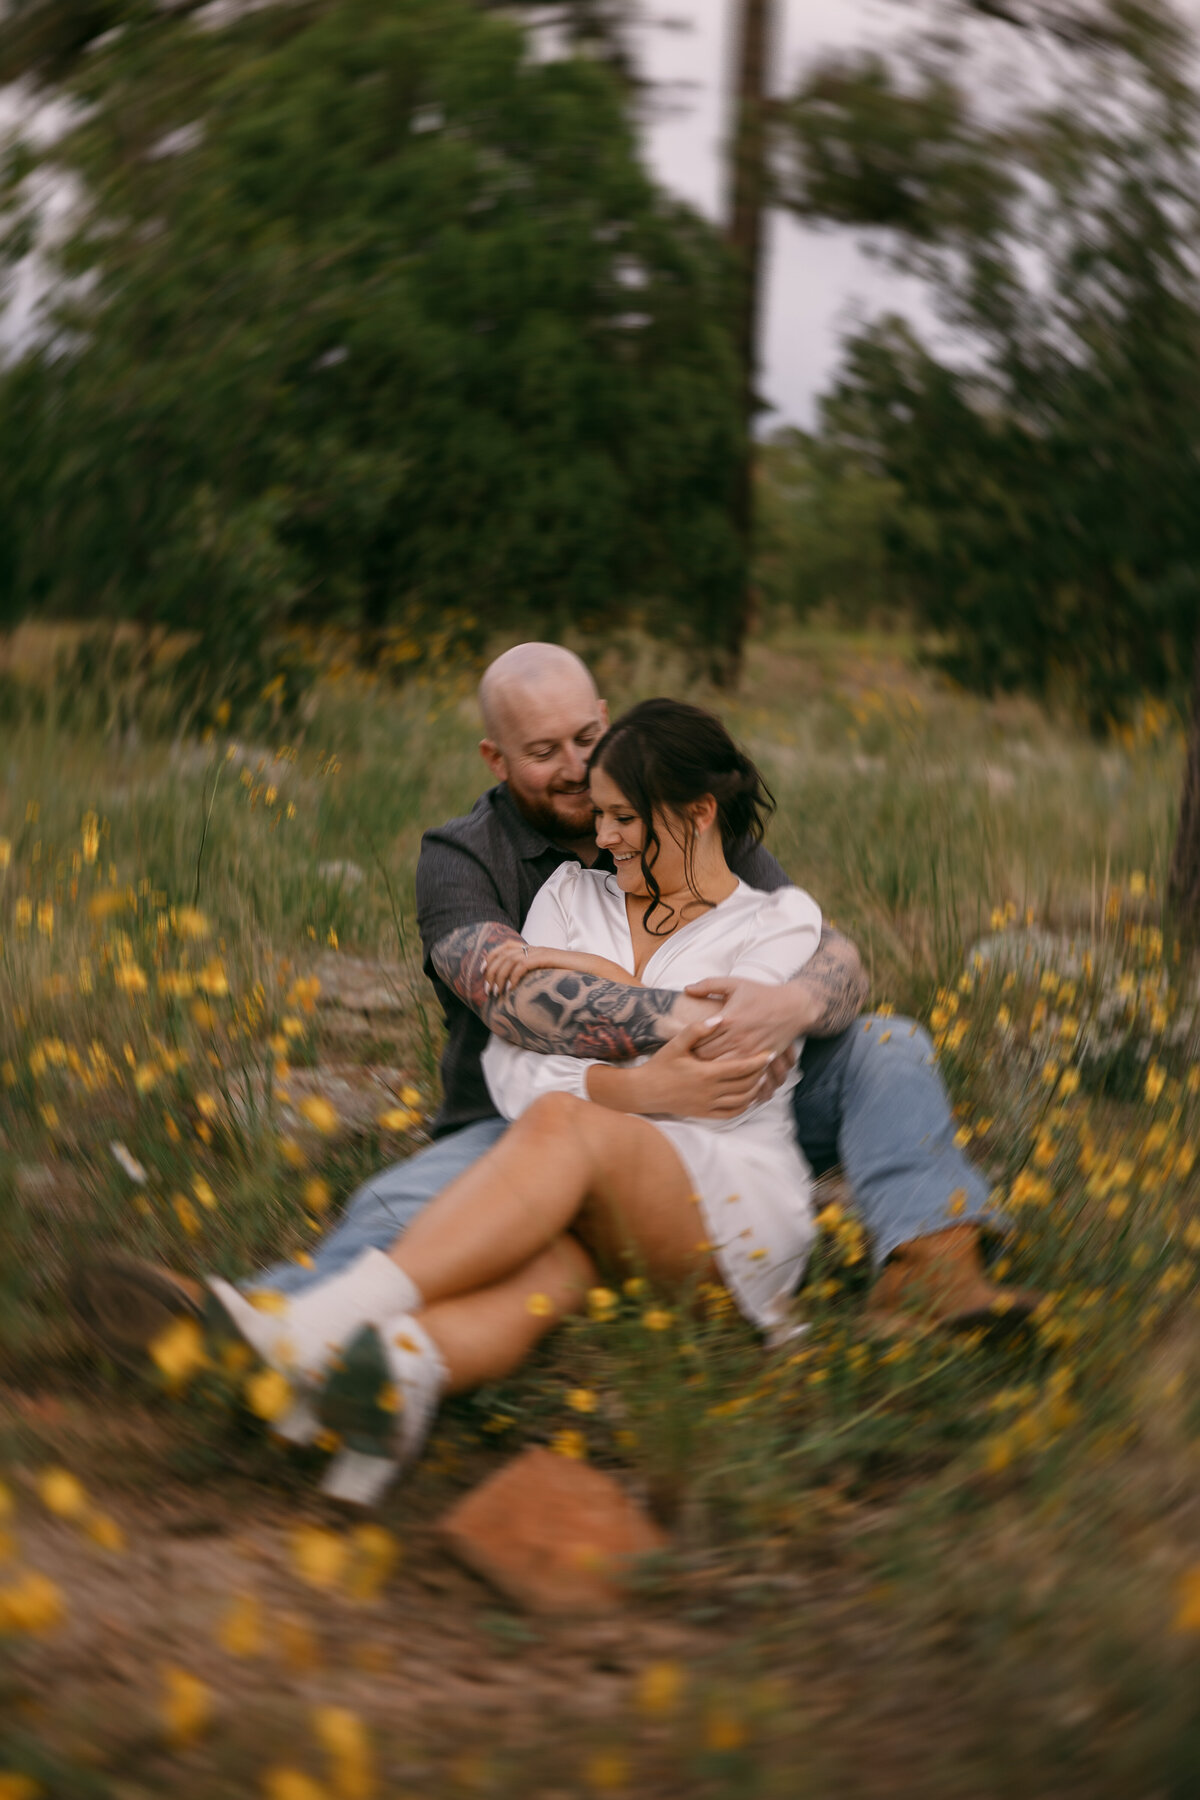 A woman leaning back into a man's arms as they sit in a field.